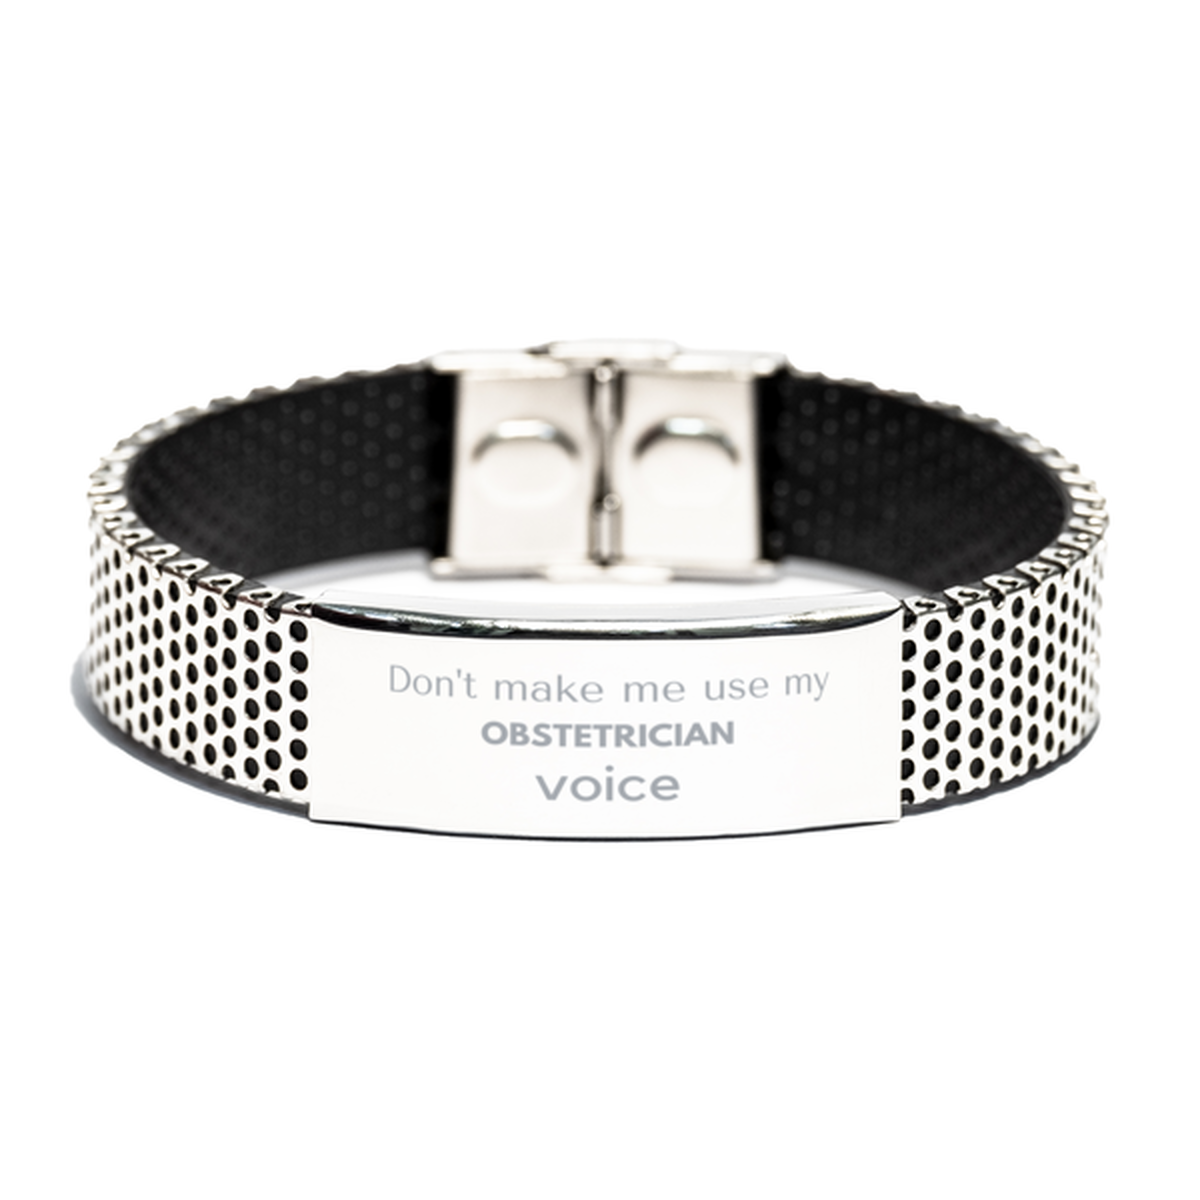 Don't make me use my Obstetrician voice, Sarcasm Obstetrician Gifts, Christmas Obstetrician Stainless Steel Bracelet Birthday Unique Gifts For Obstetrician Coworkers, Men, Women, Colleague, Friends